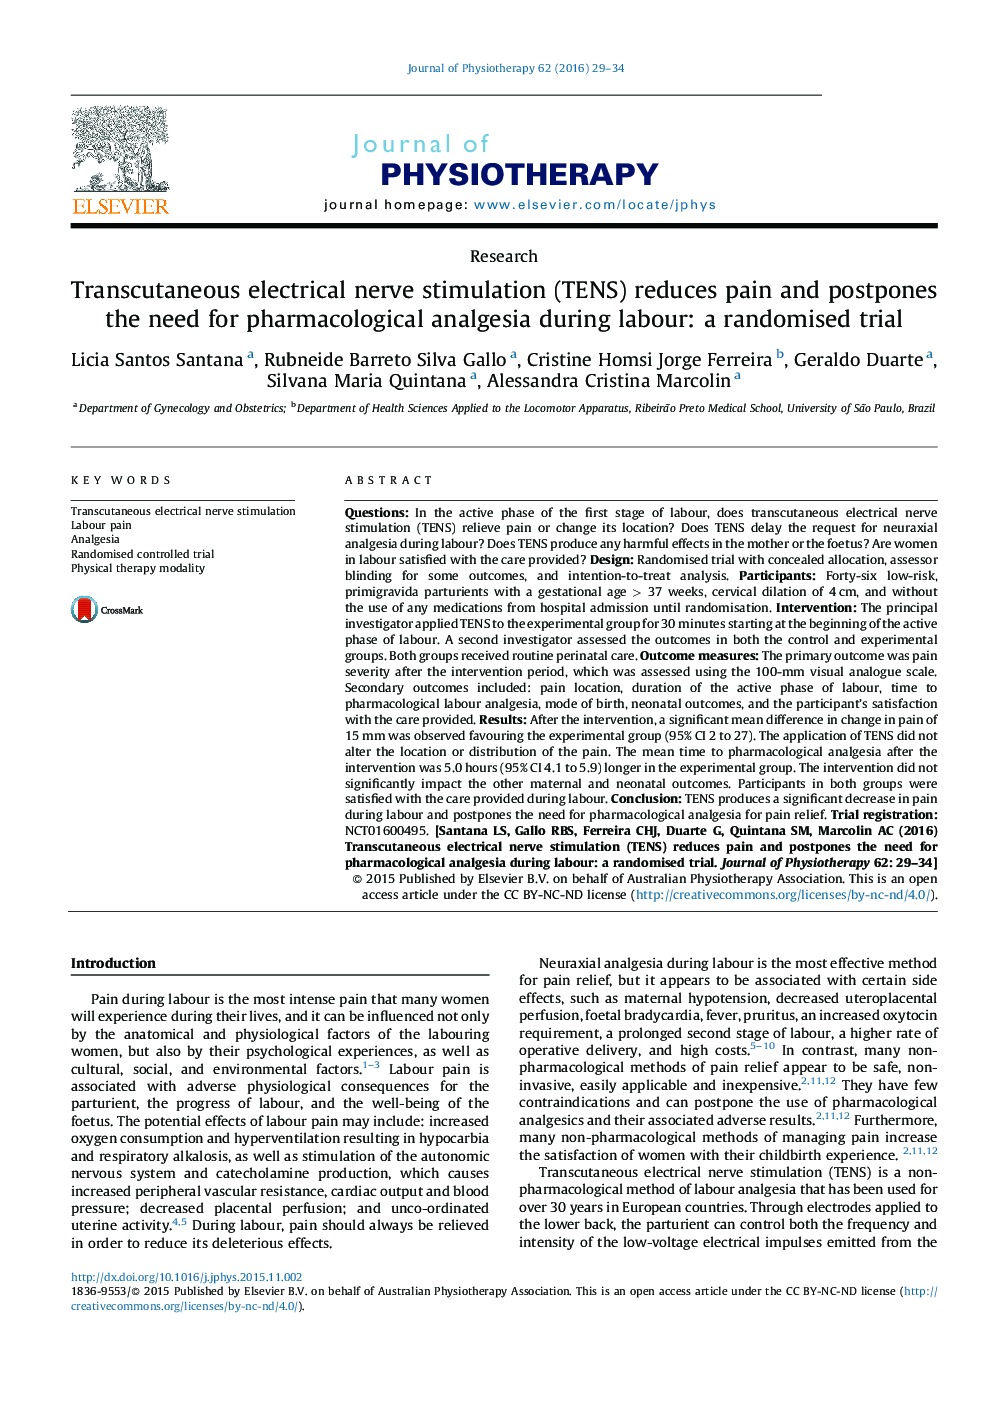 Transcutaneous electrical nerve stimulation (TENS) reduces pain and postpones the need for pharmacological analgesia during labour: a randomised trial